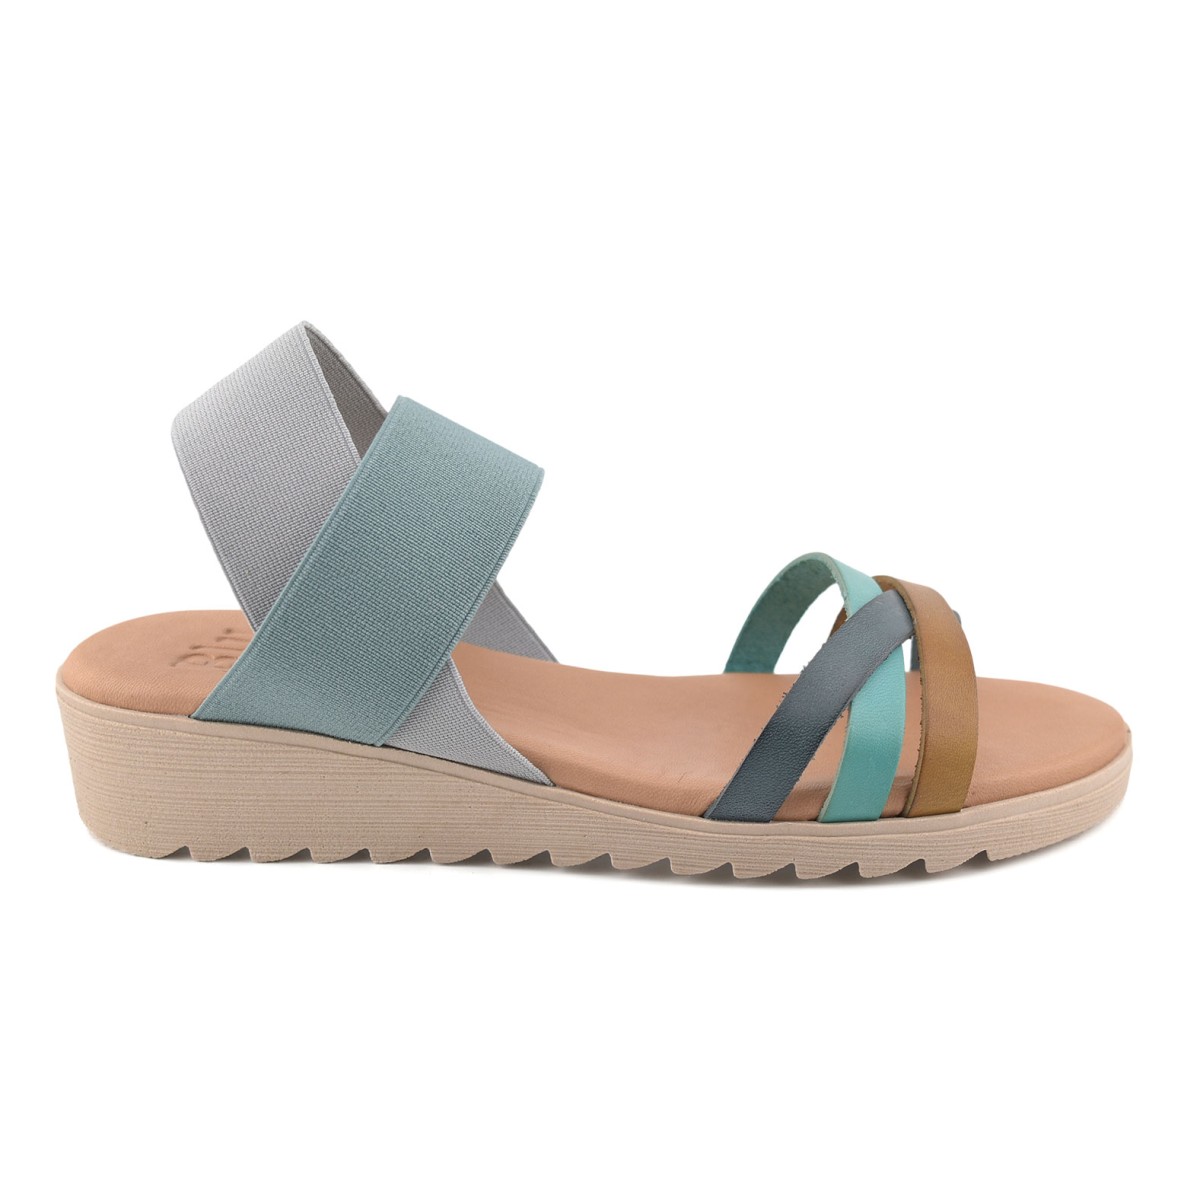 Blue leather wedge sandals by Blusandal